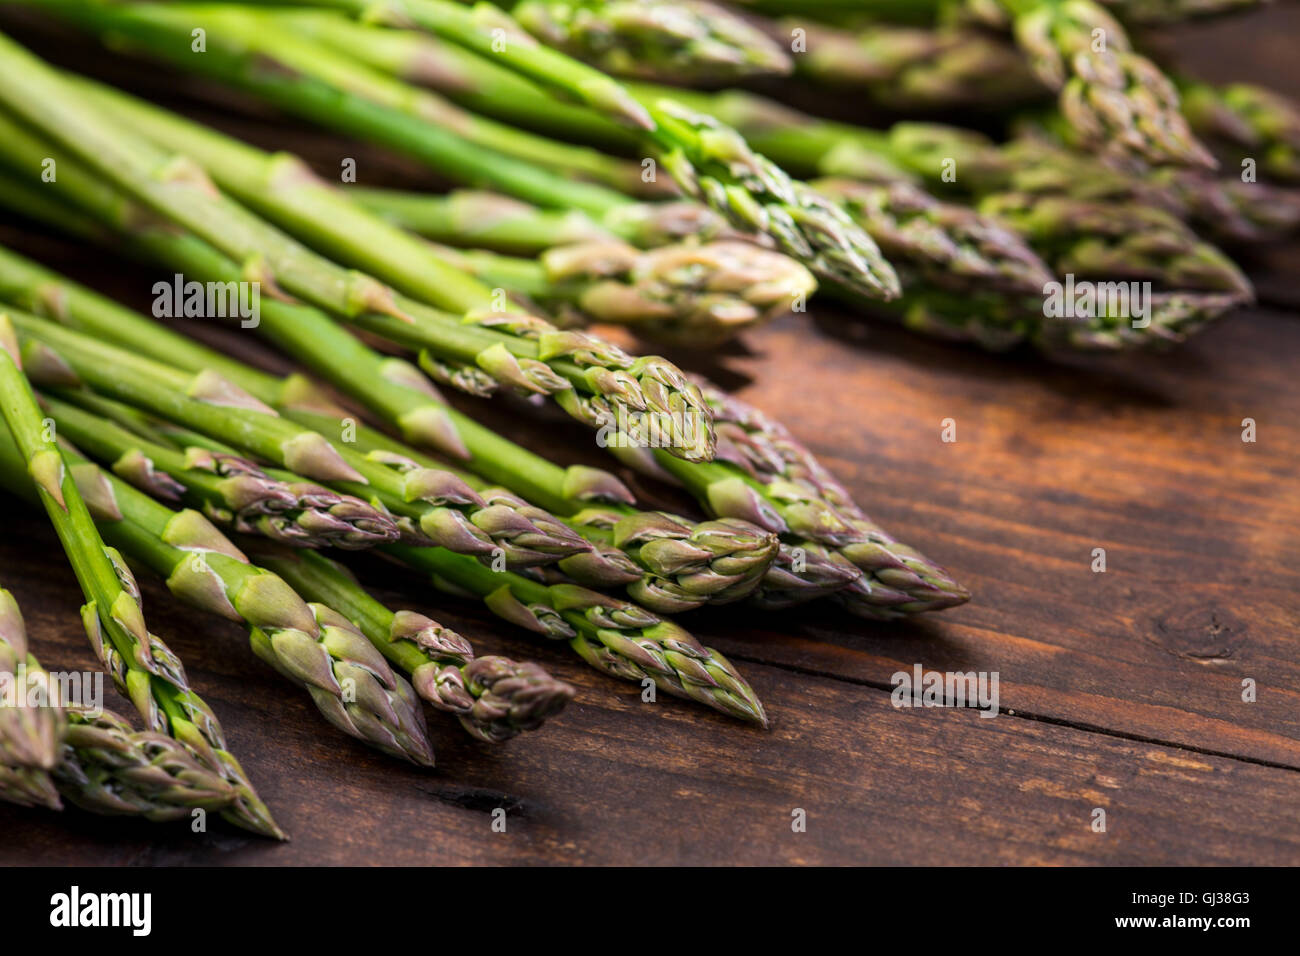 Bunches of asparagus officinalis  on table Stock Photo